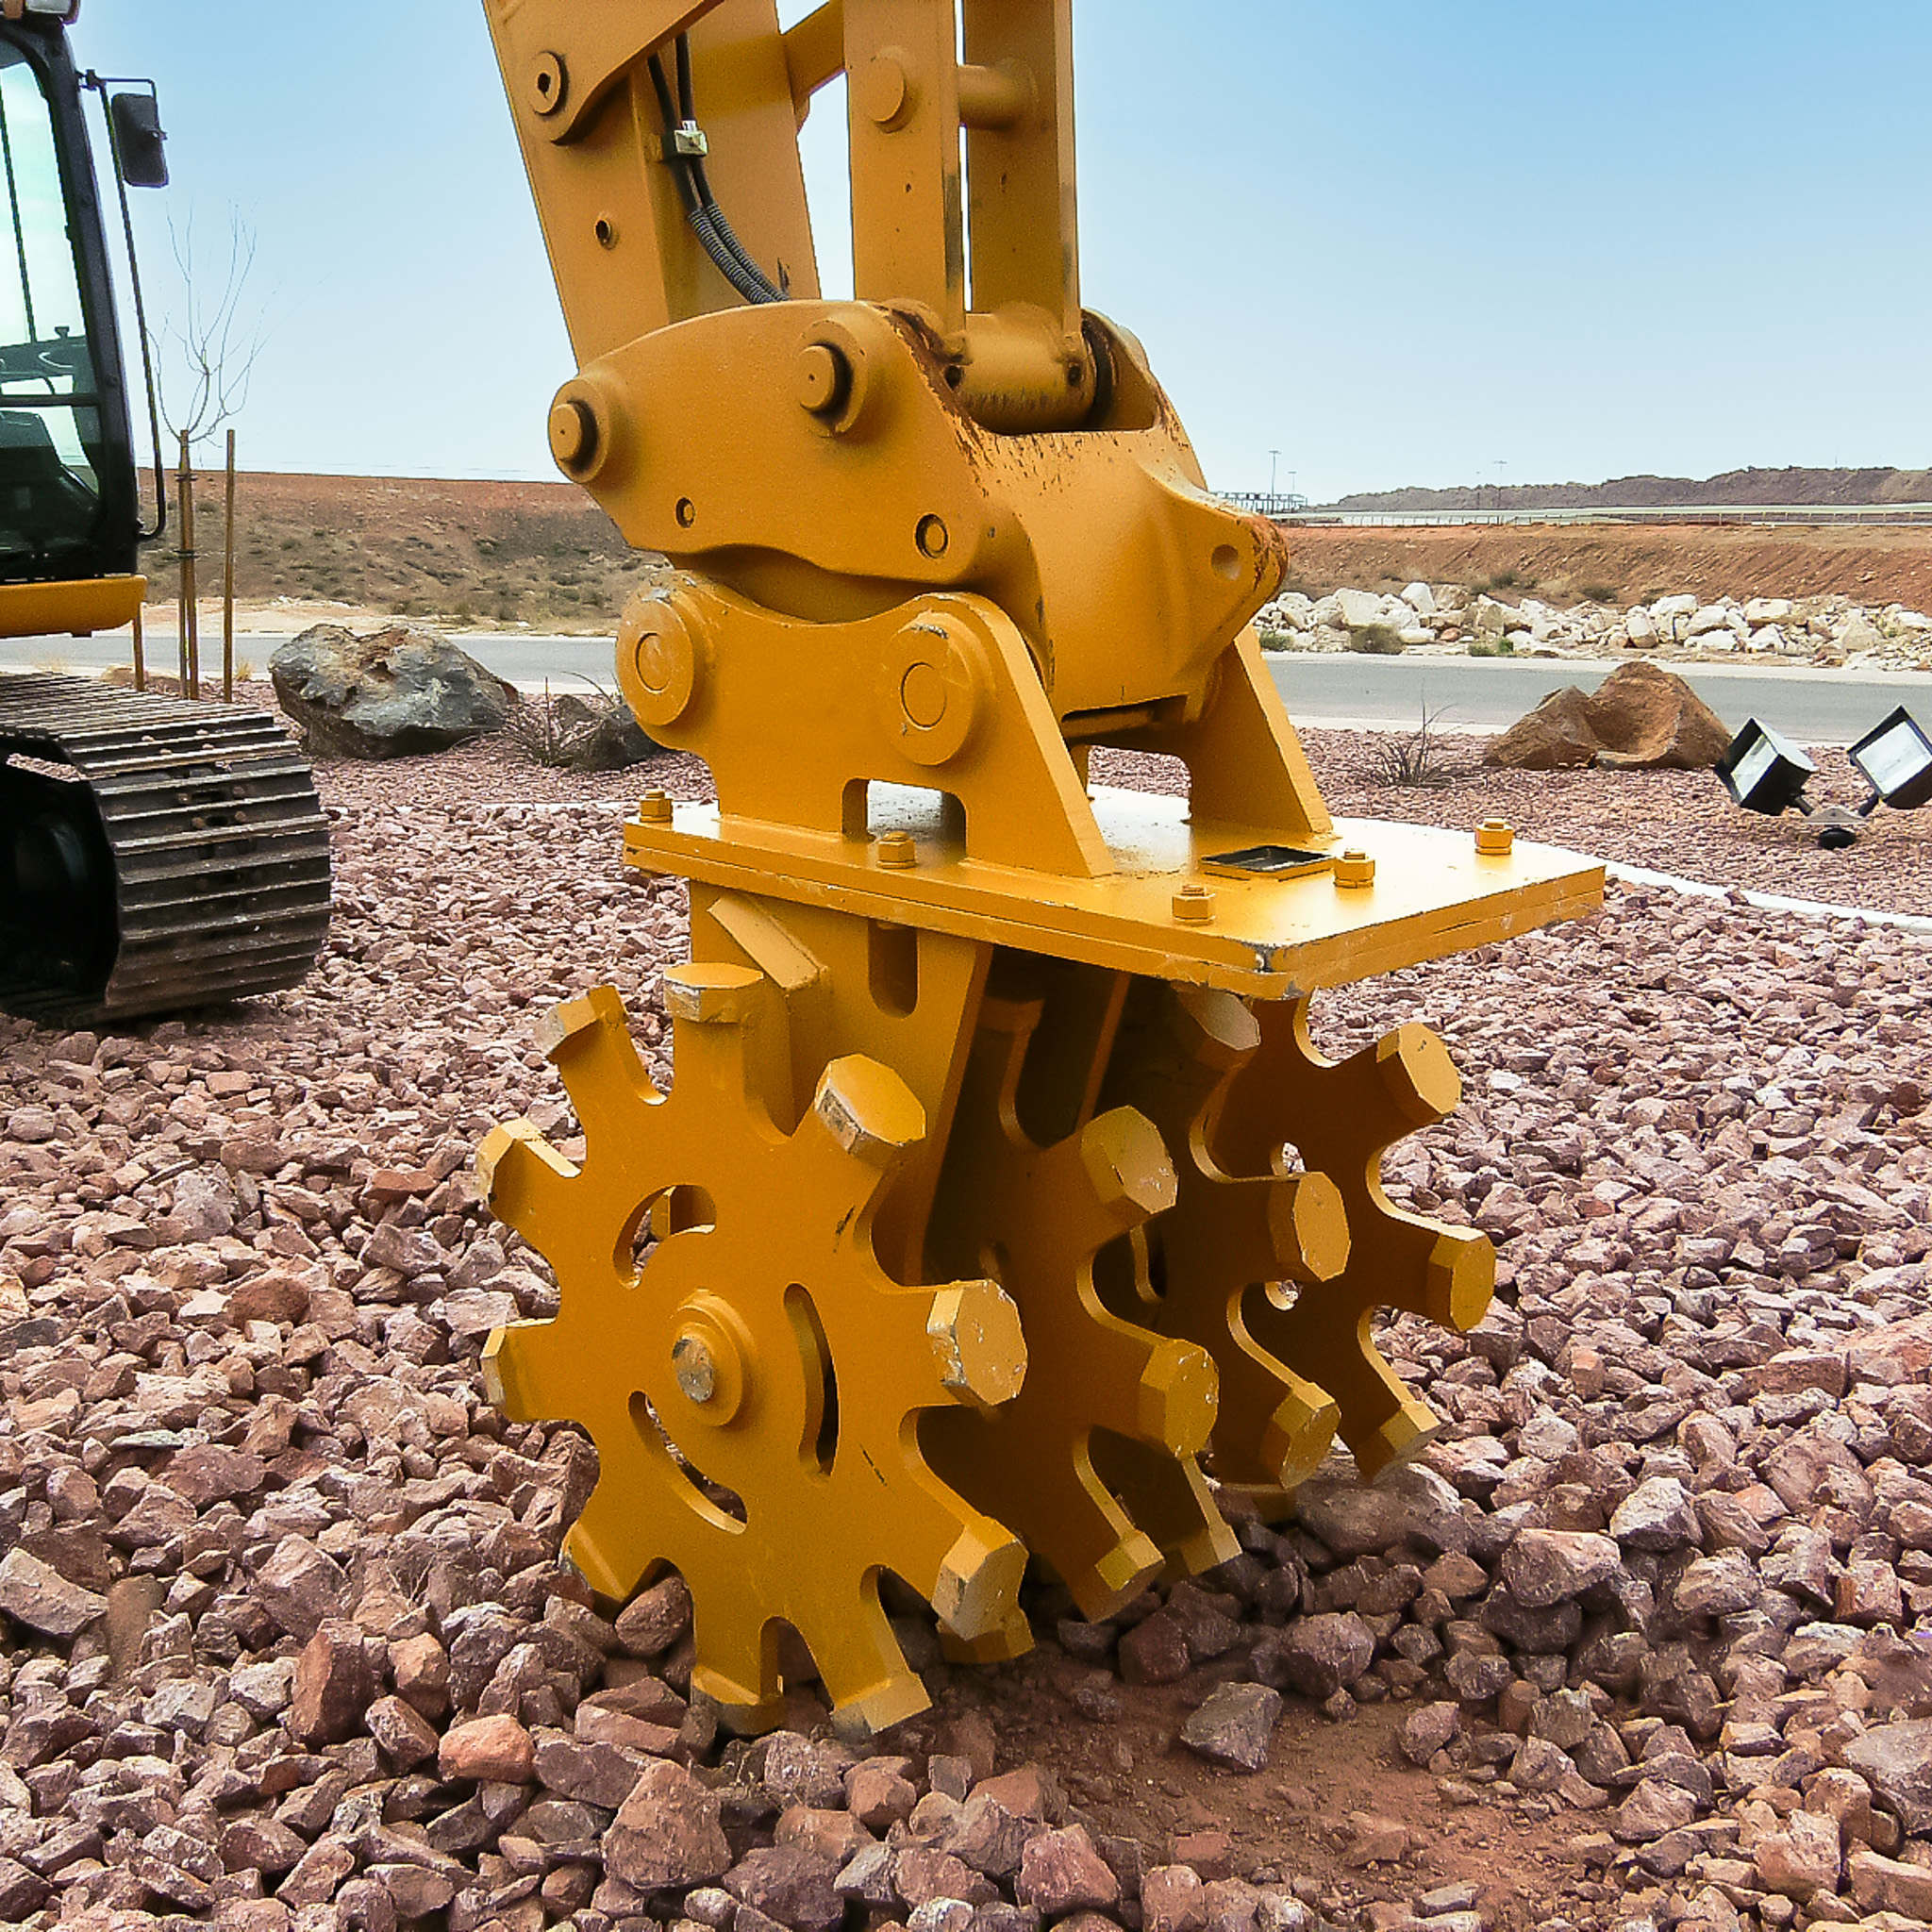 Excavator Compaction Wheel Tamper Foot for sale Crushing Stone - Rockland Manufacturing